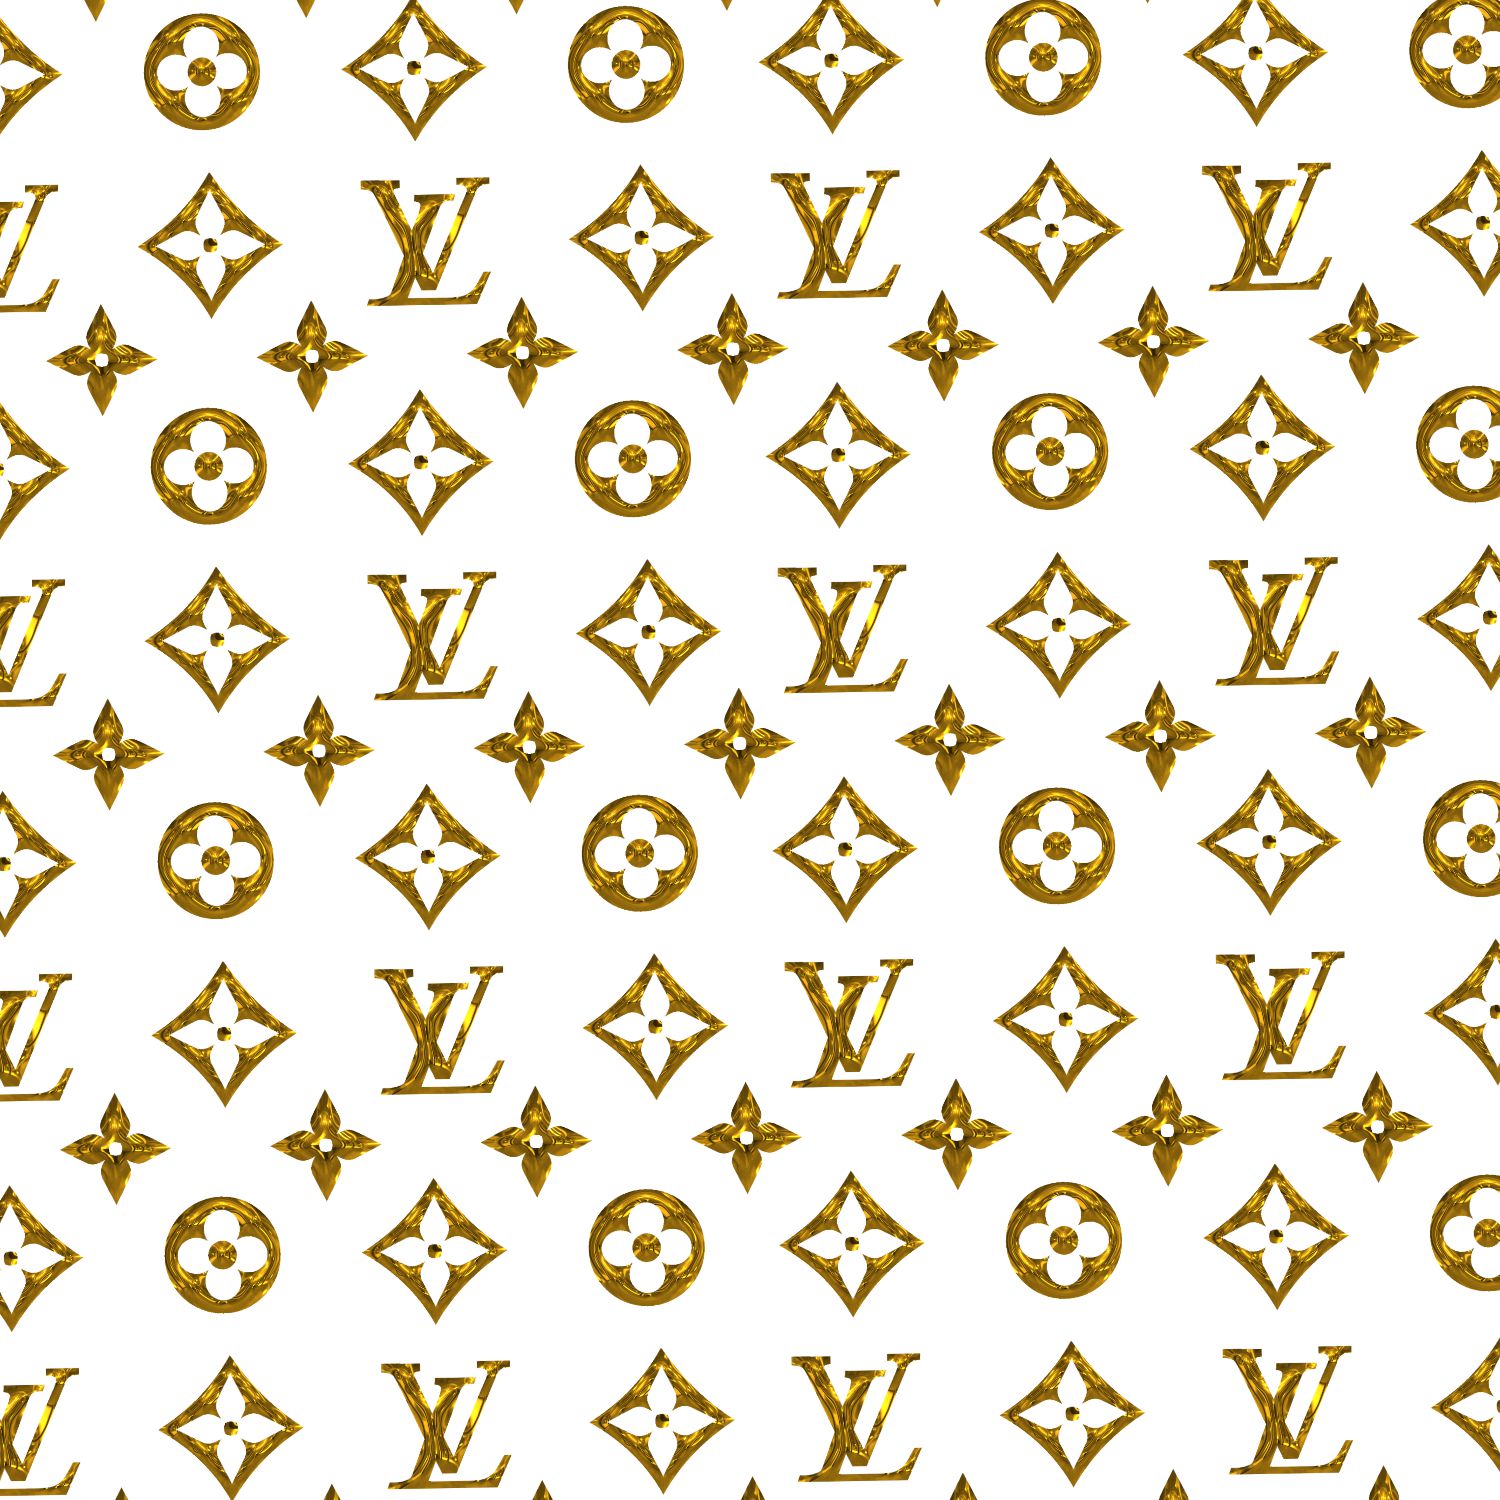 Printable Lv Pattern - Customize and Print